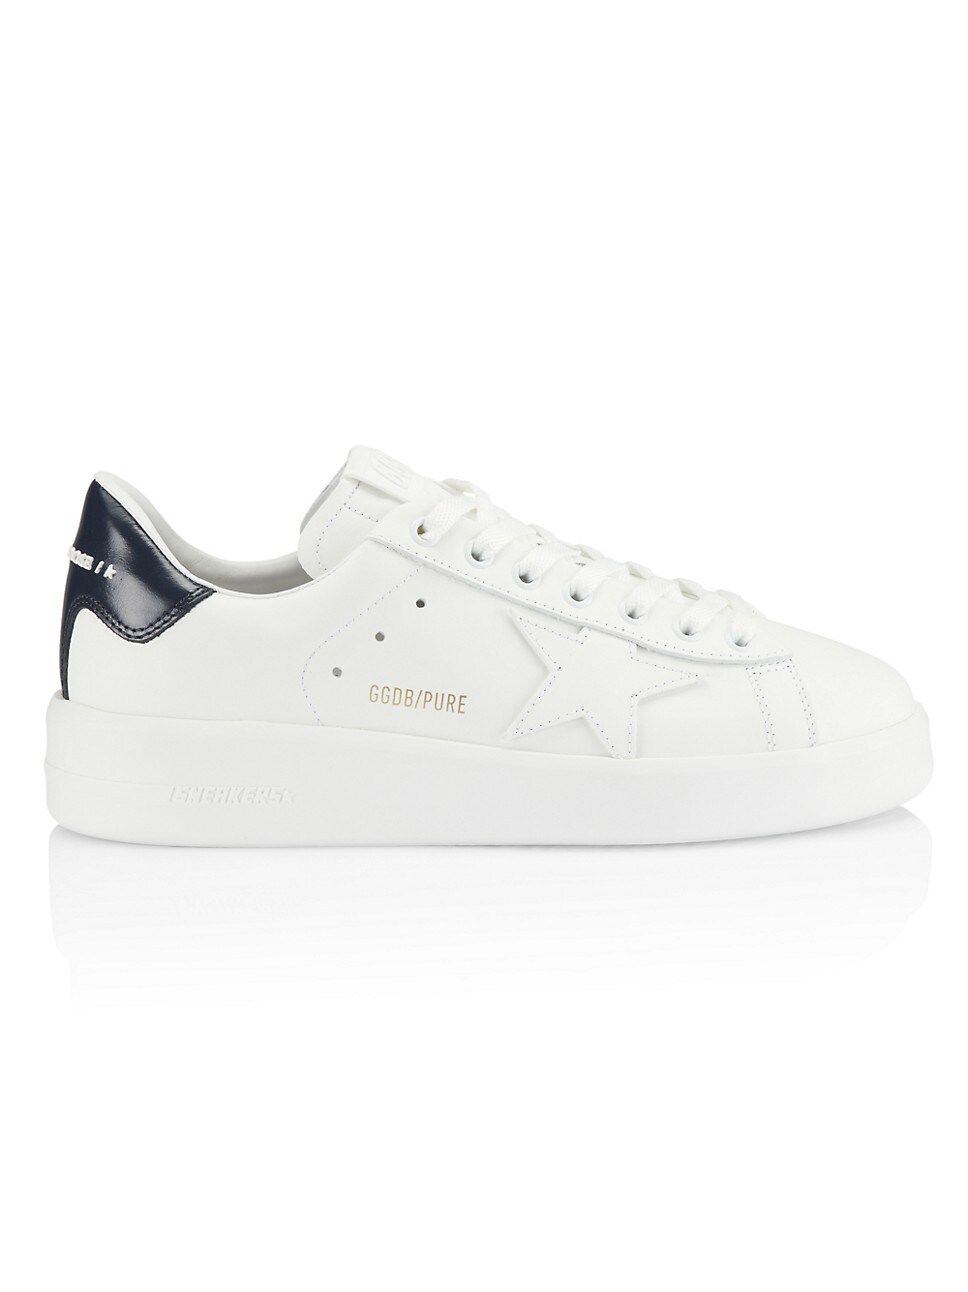 Purestar Leather Sneakers | Saks Fifth Avenue